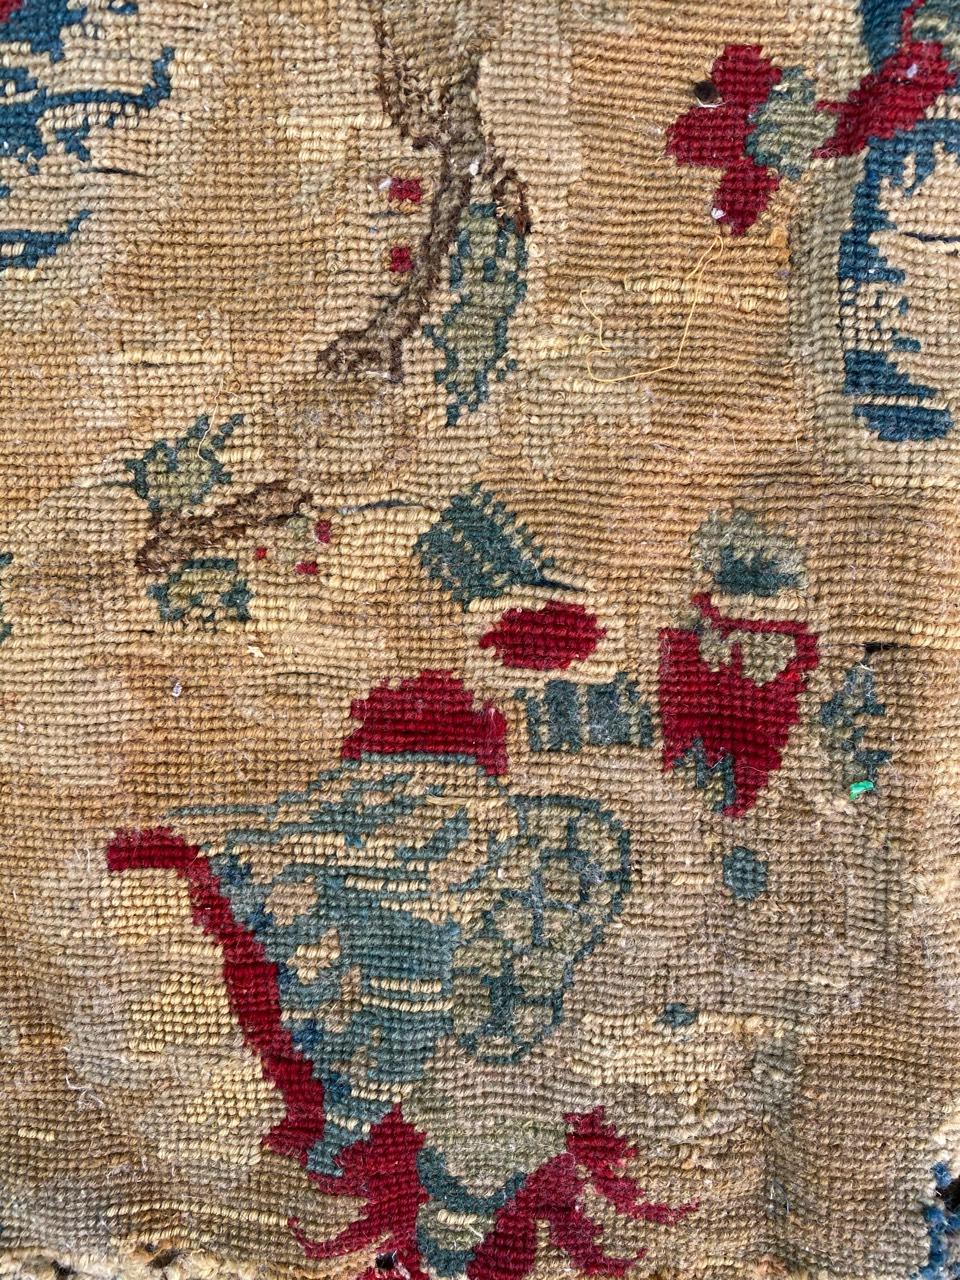 19th Century Beautiful Antique Needlepoint Tapestry For Sale